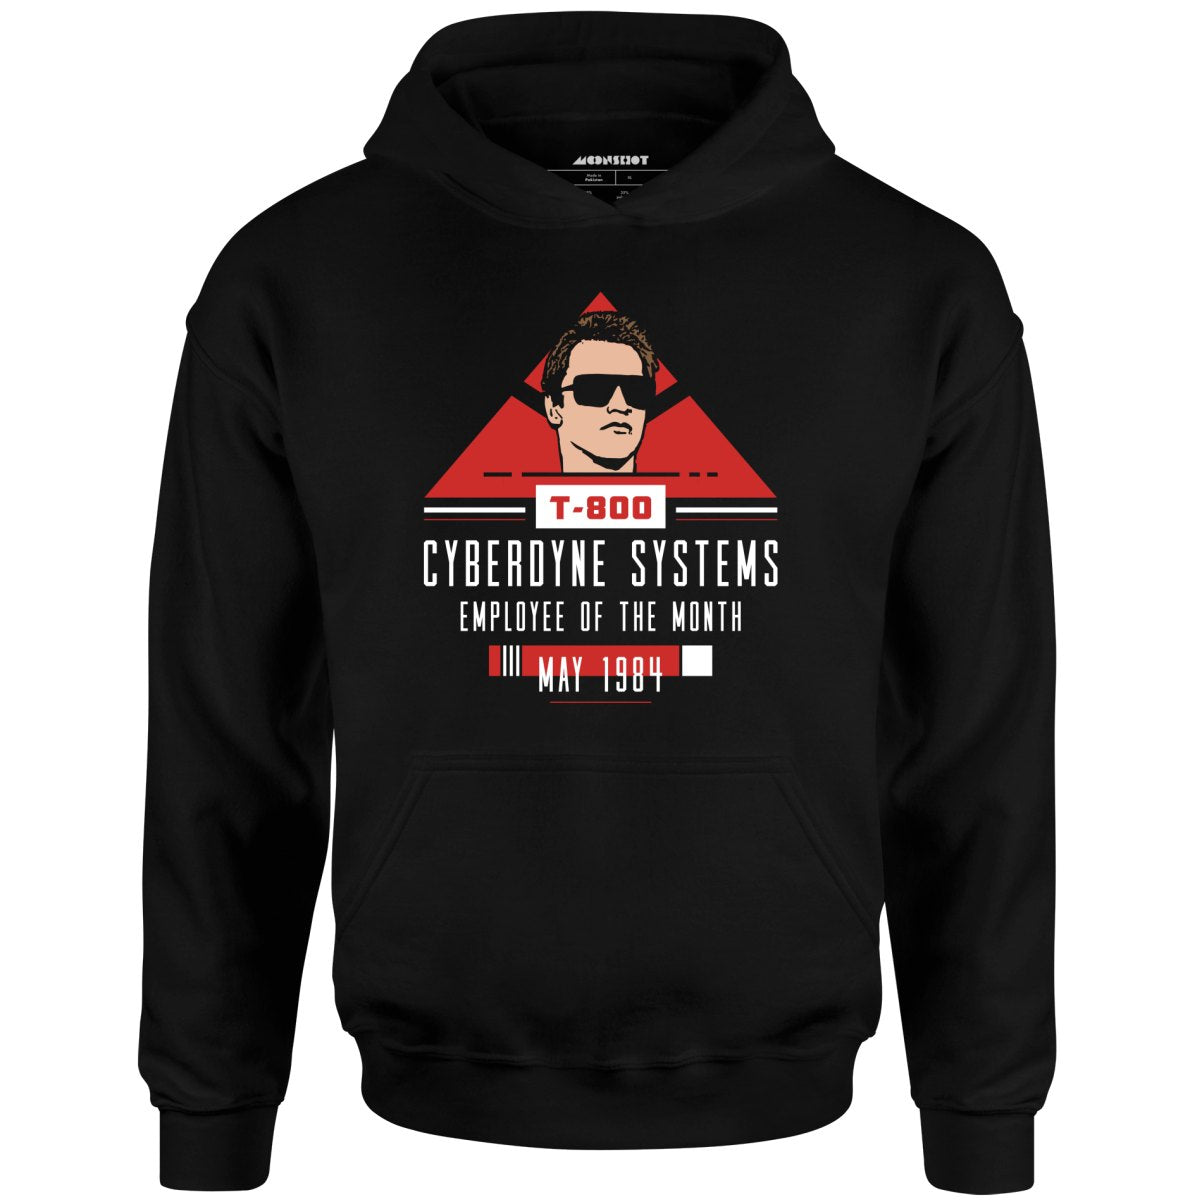 T-800 Cyberdyne Systems Employee of the Month - Unisex Hoodie